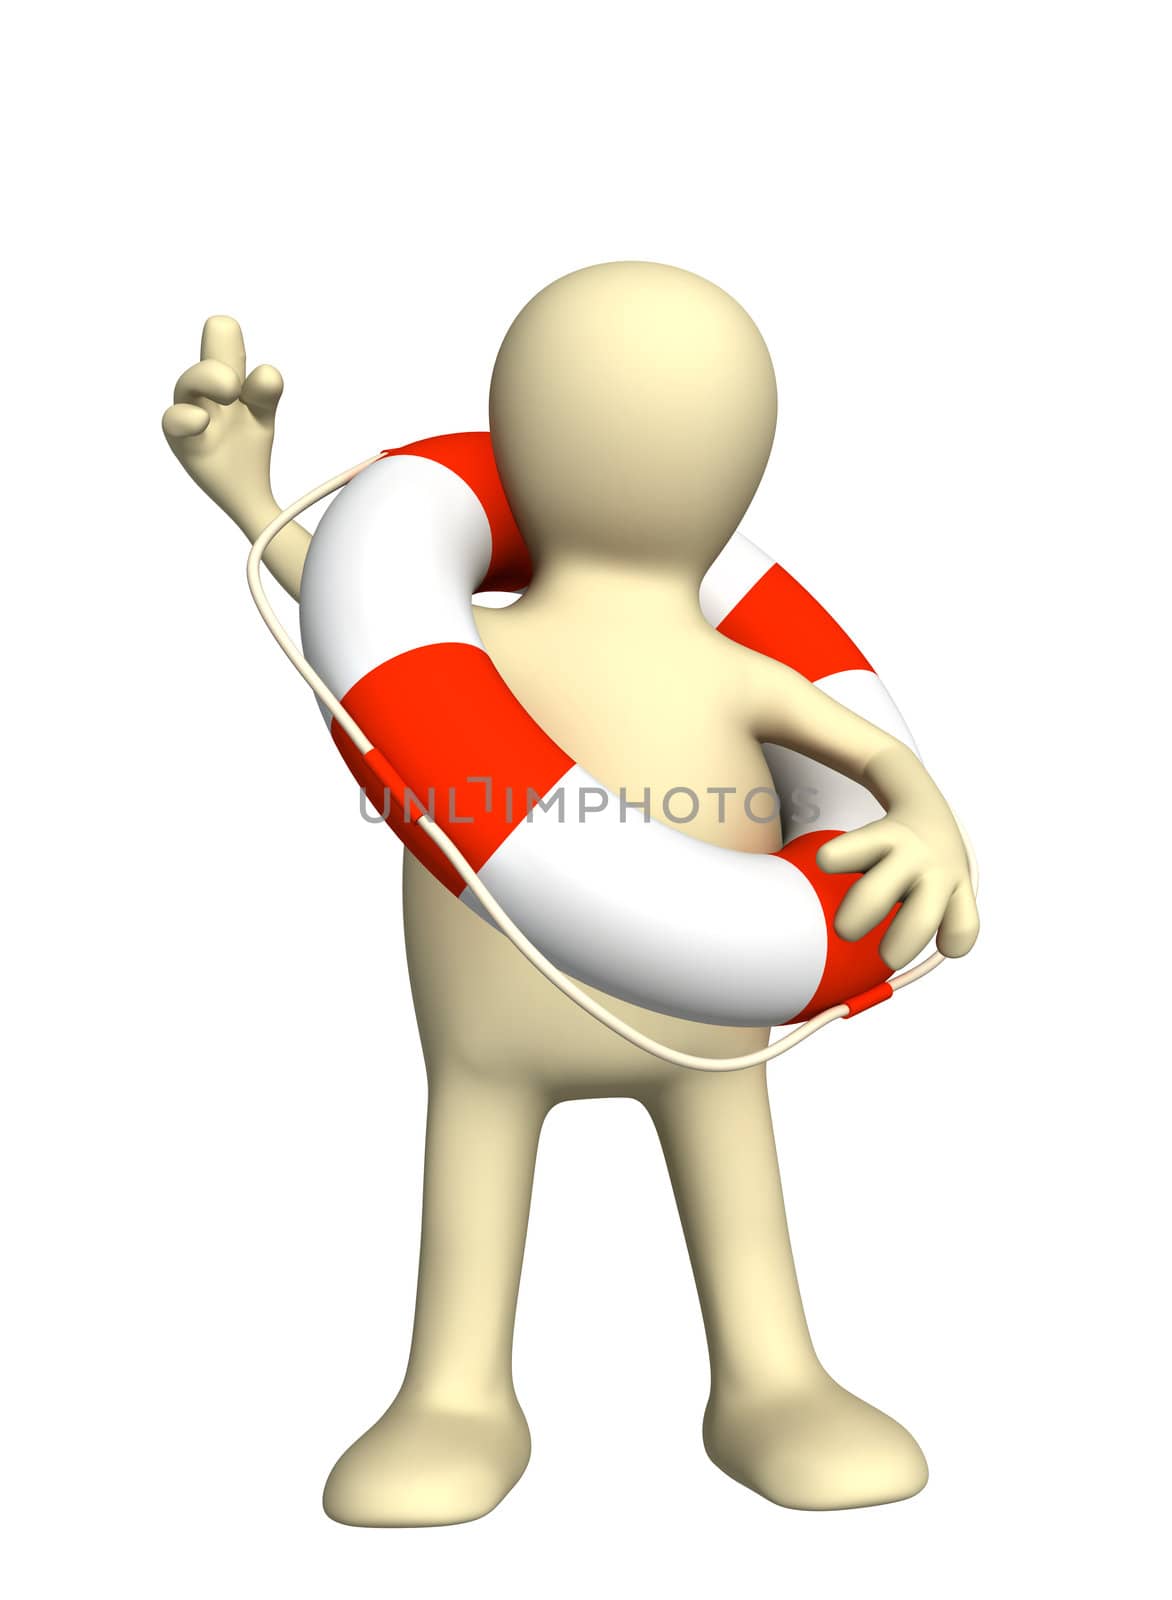 Puppet with lifebuoy. Isolated over white